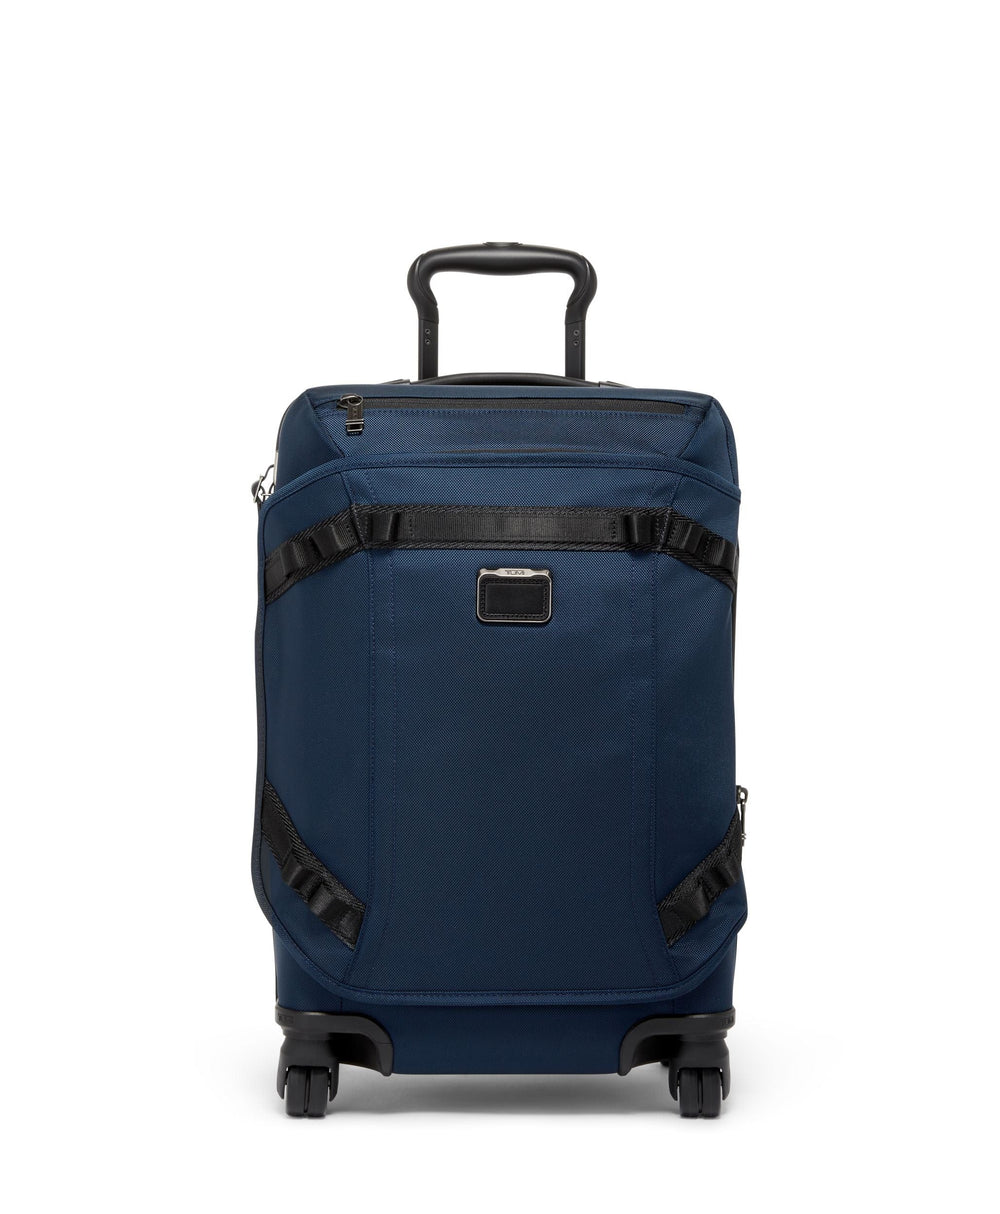 international-front-lid-expandable-4-wheel-carry-on-1 Alpha Bravo